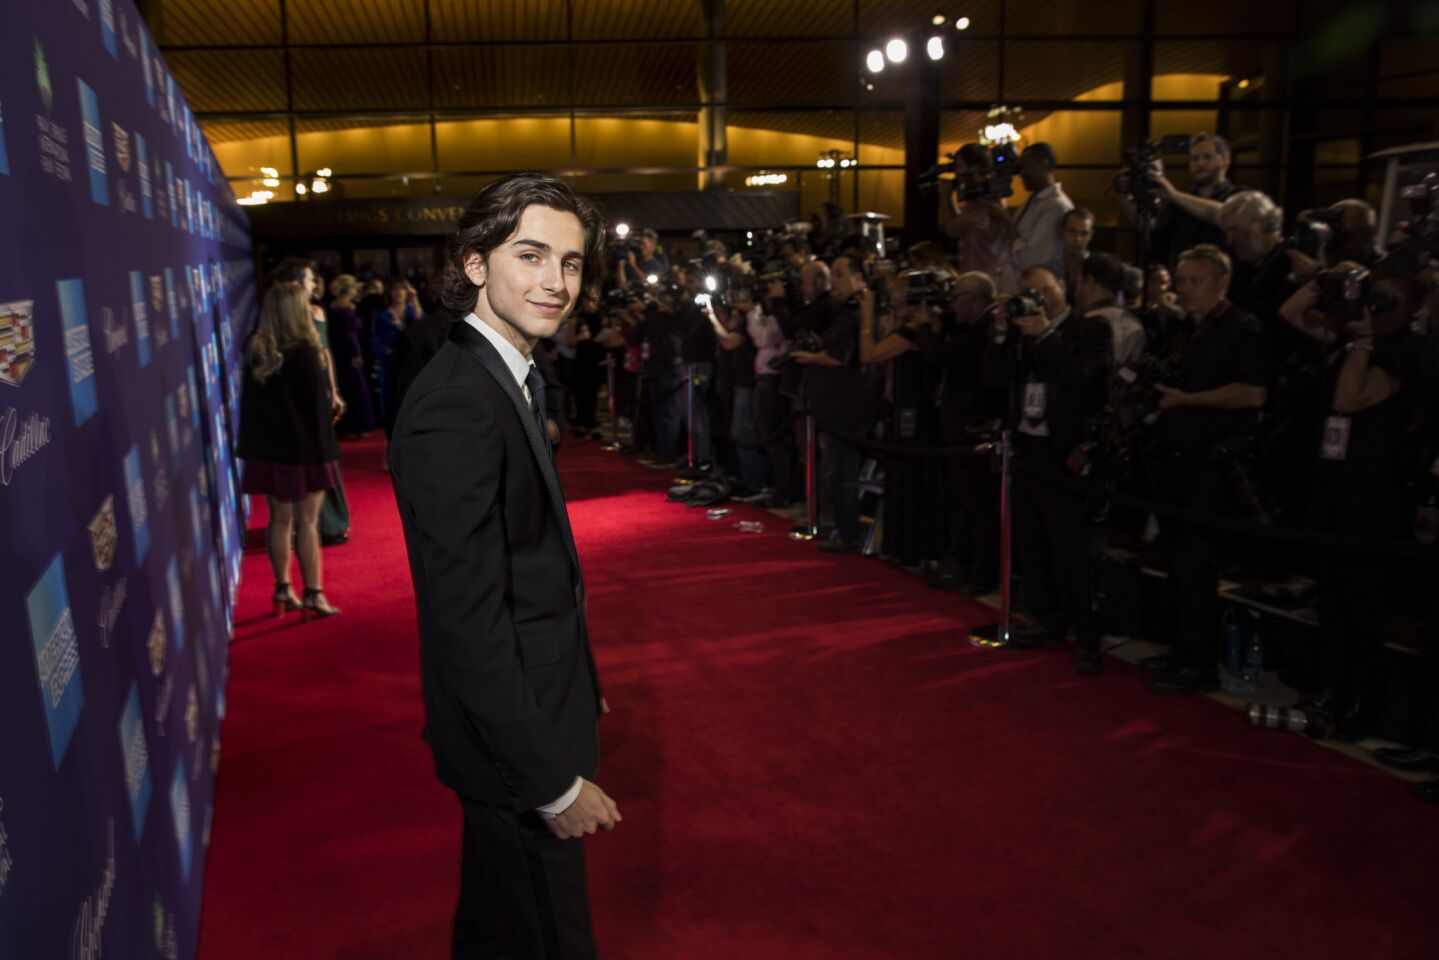 Timothee Chalamet on the red carpet of the Palm Springs International Film Festival Gala. Chalamet received the Rising Star Award.